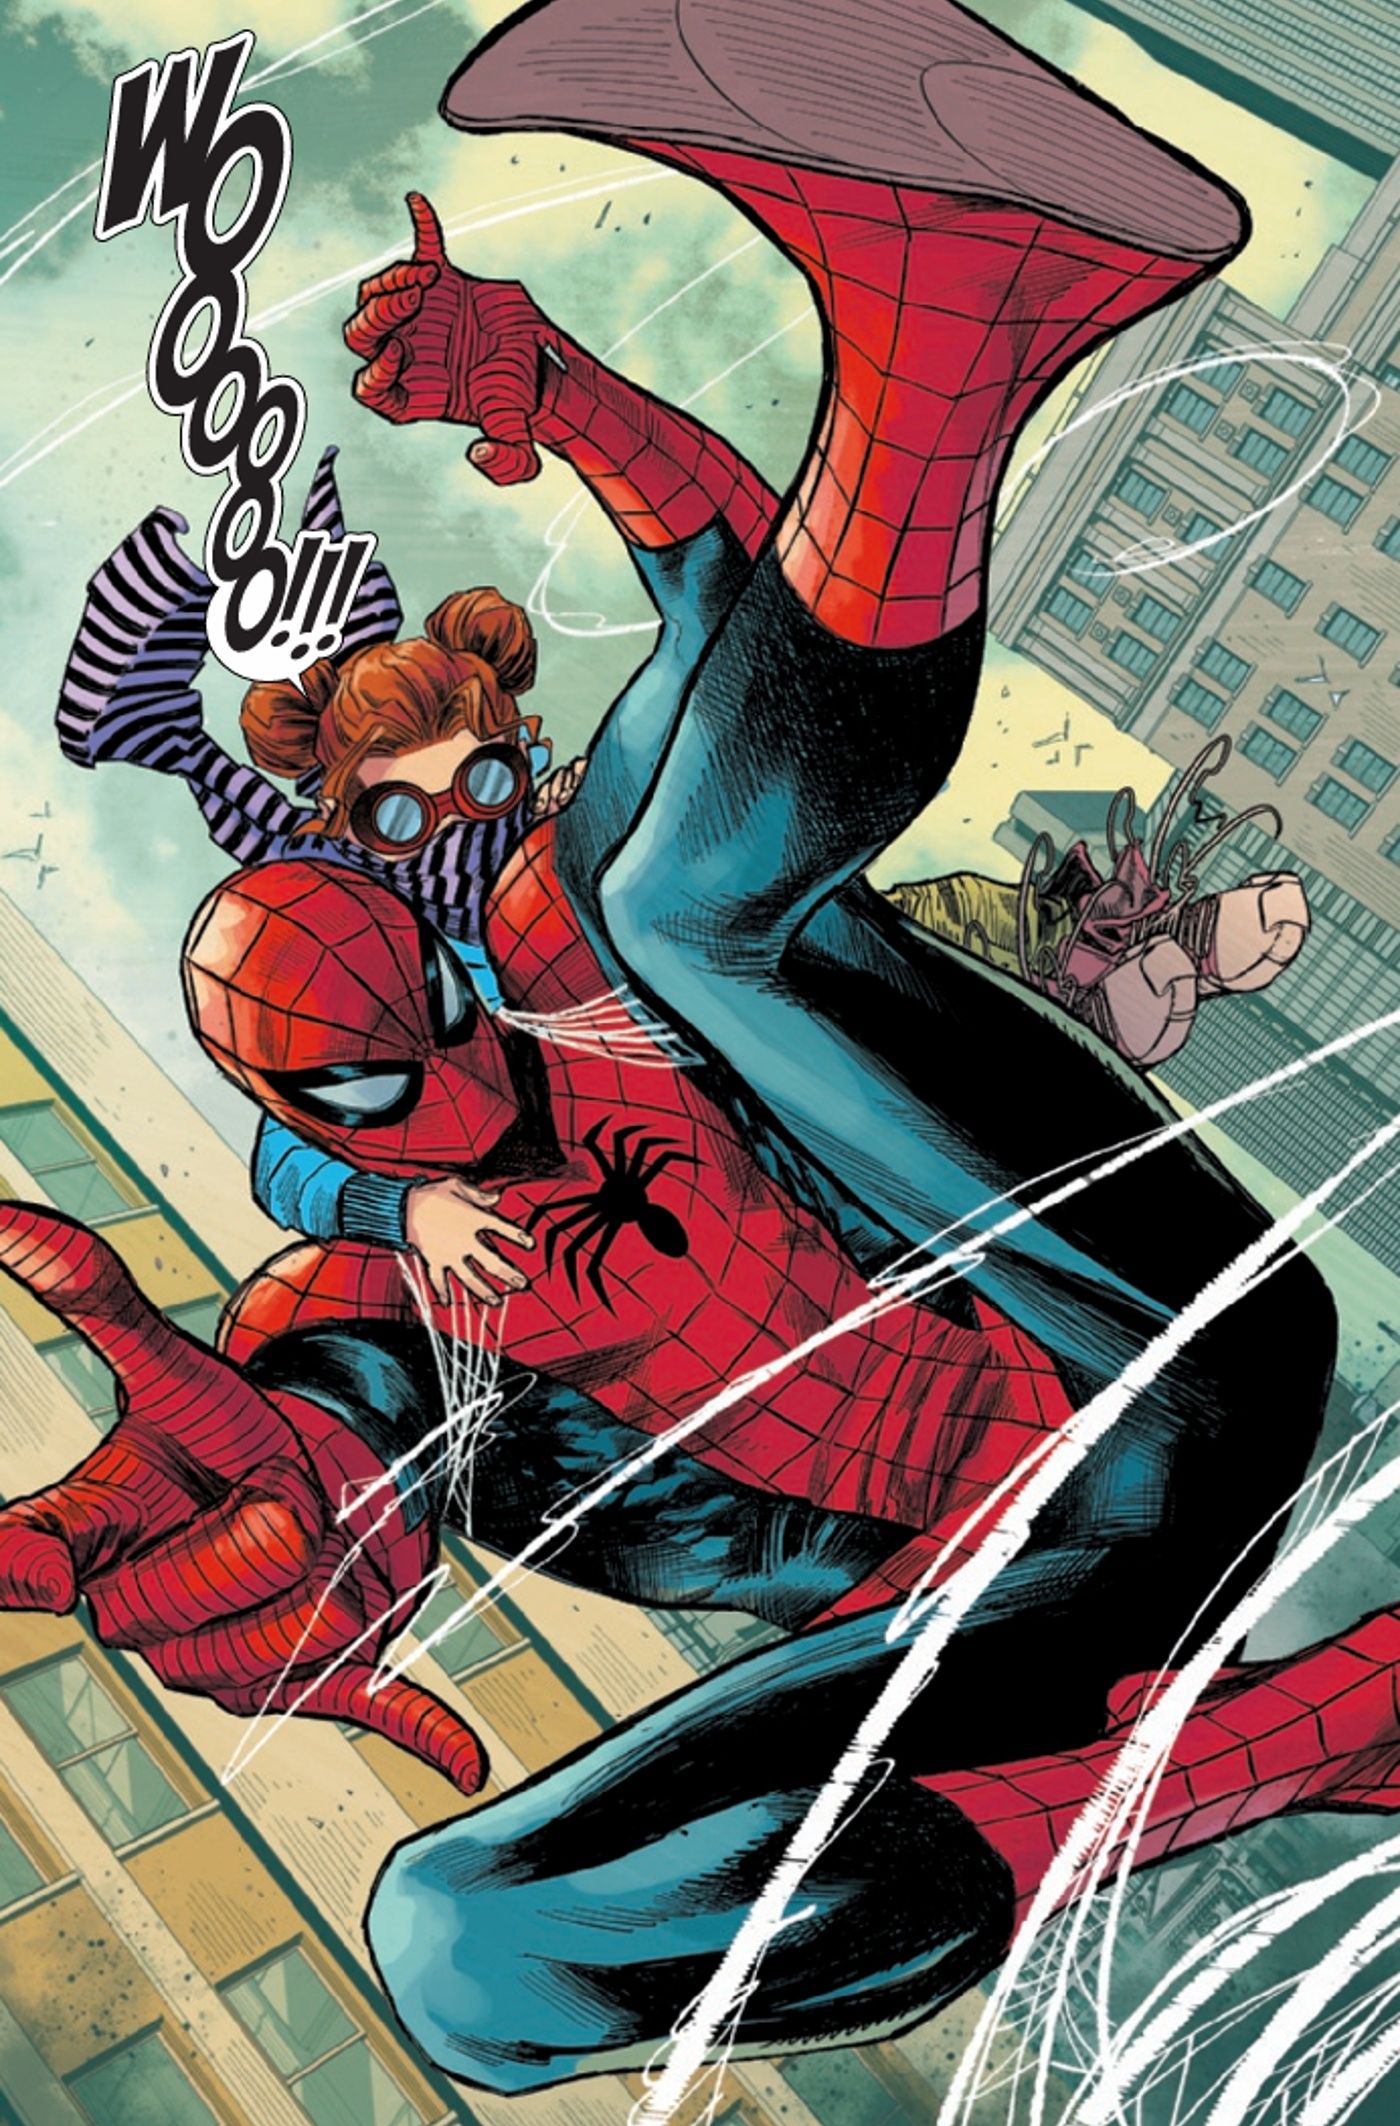 Ultimate Spider-Man #3, Peter Parker wears his new costume with his daughter May Parker